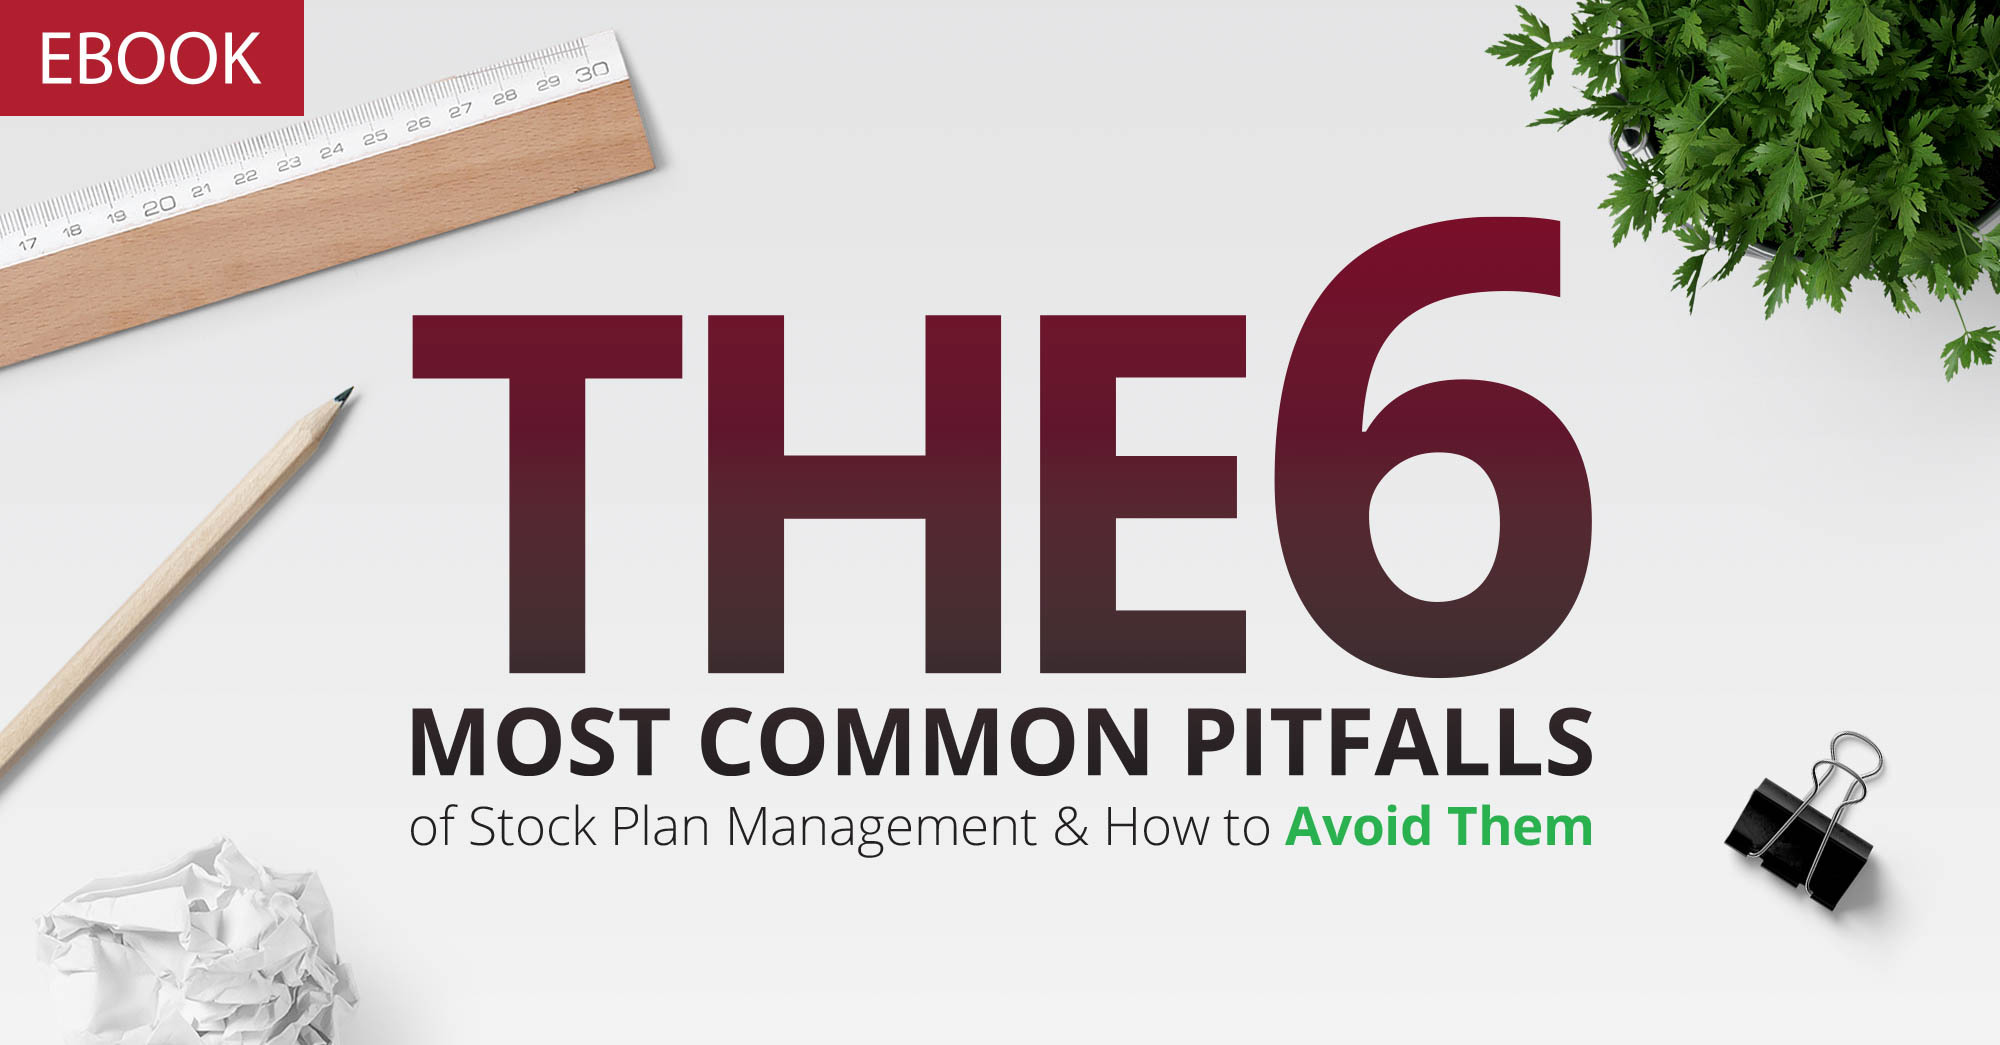 eBook: The 6 Most Common Pitfalls of Stock Plan Management and How to Avoid Them